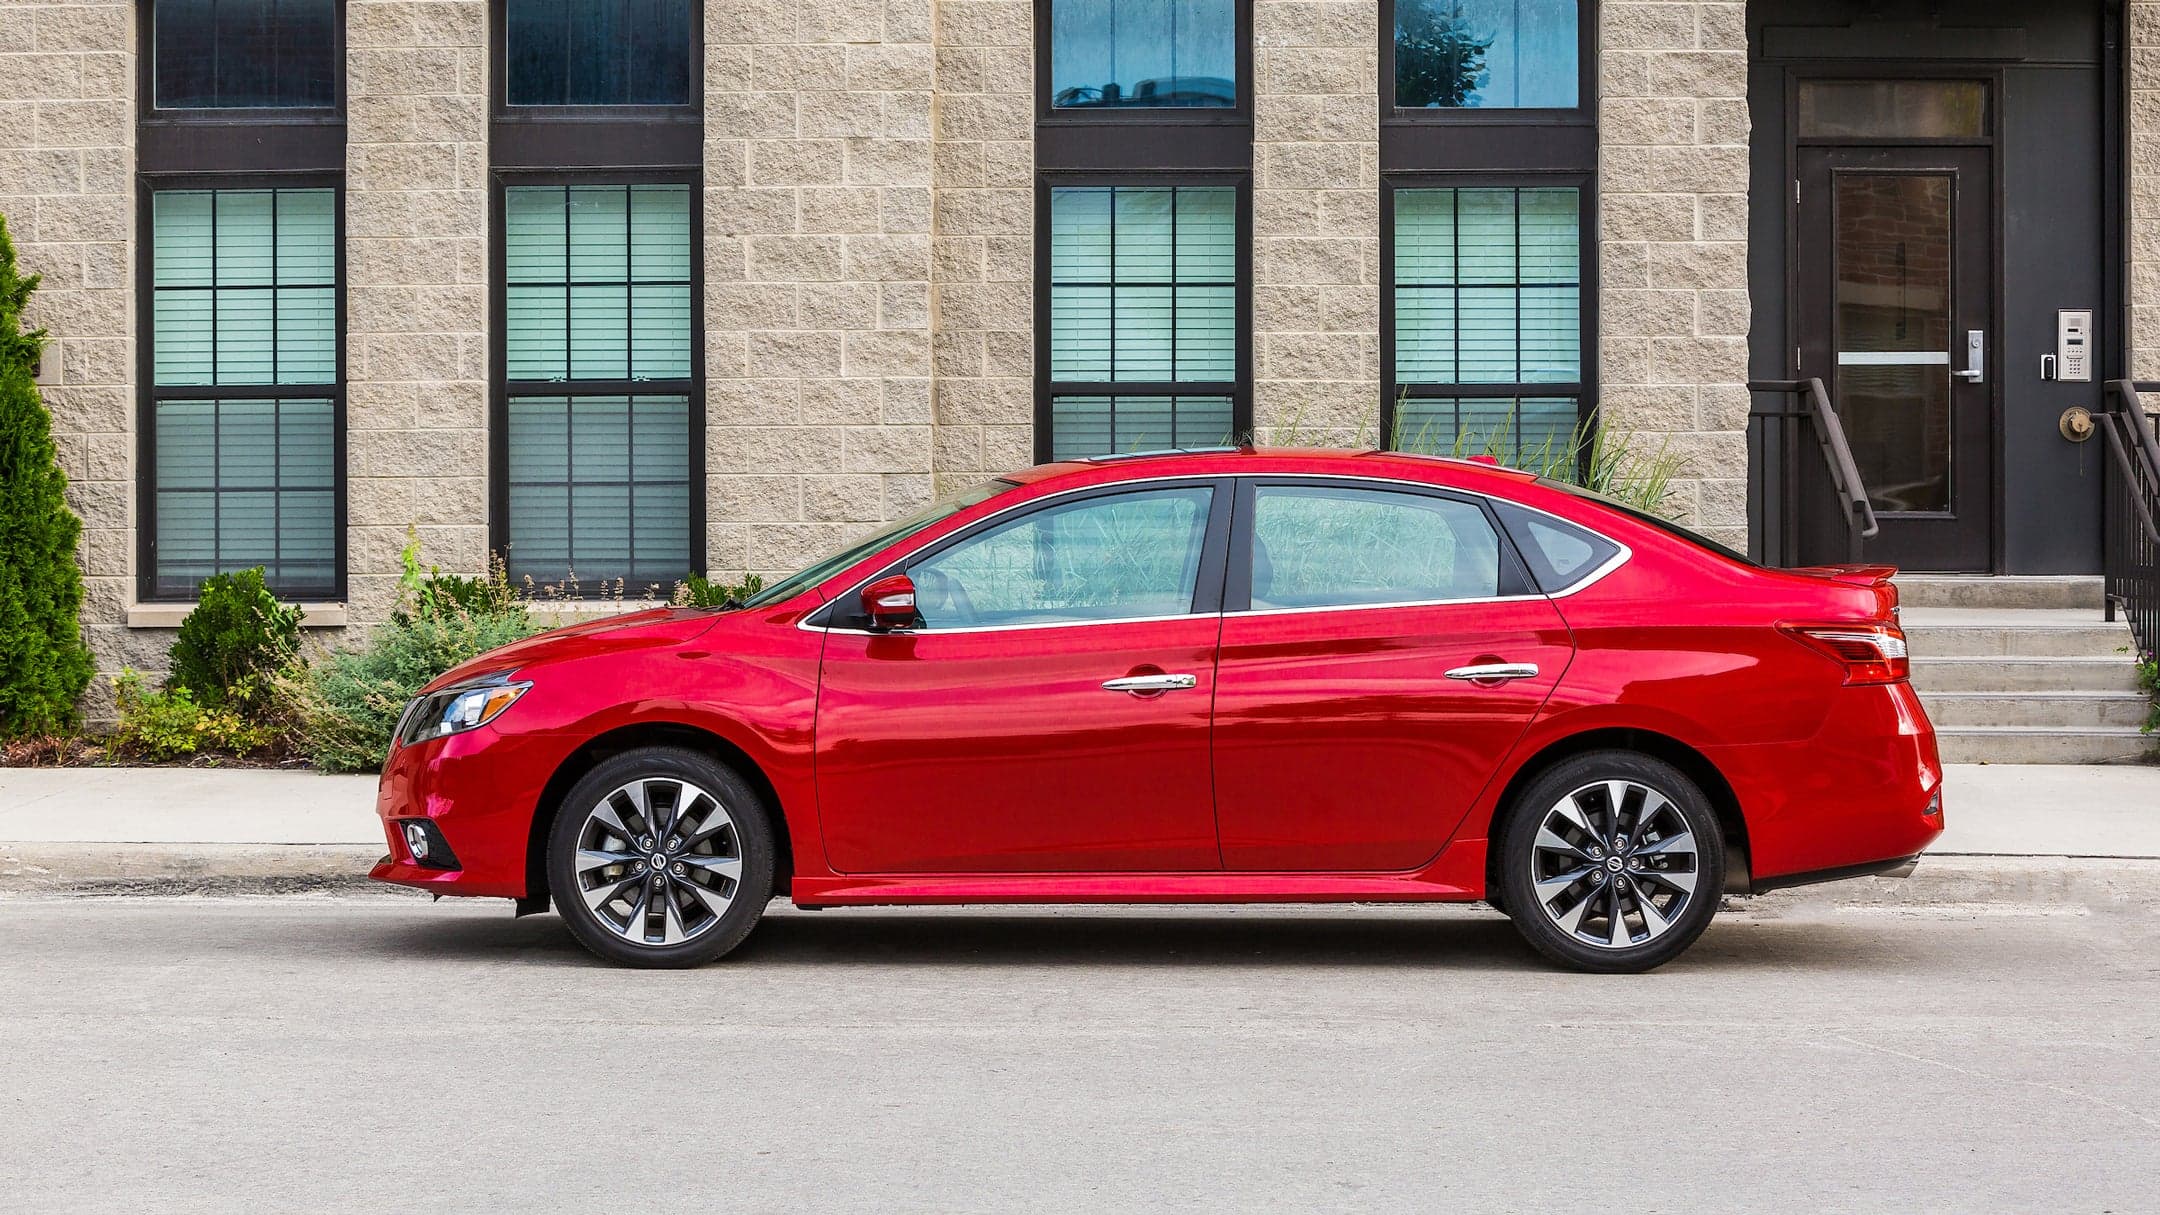 2019 Nissan Sentra: More of the Same